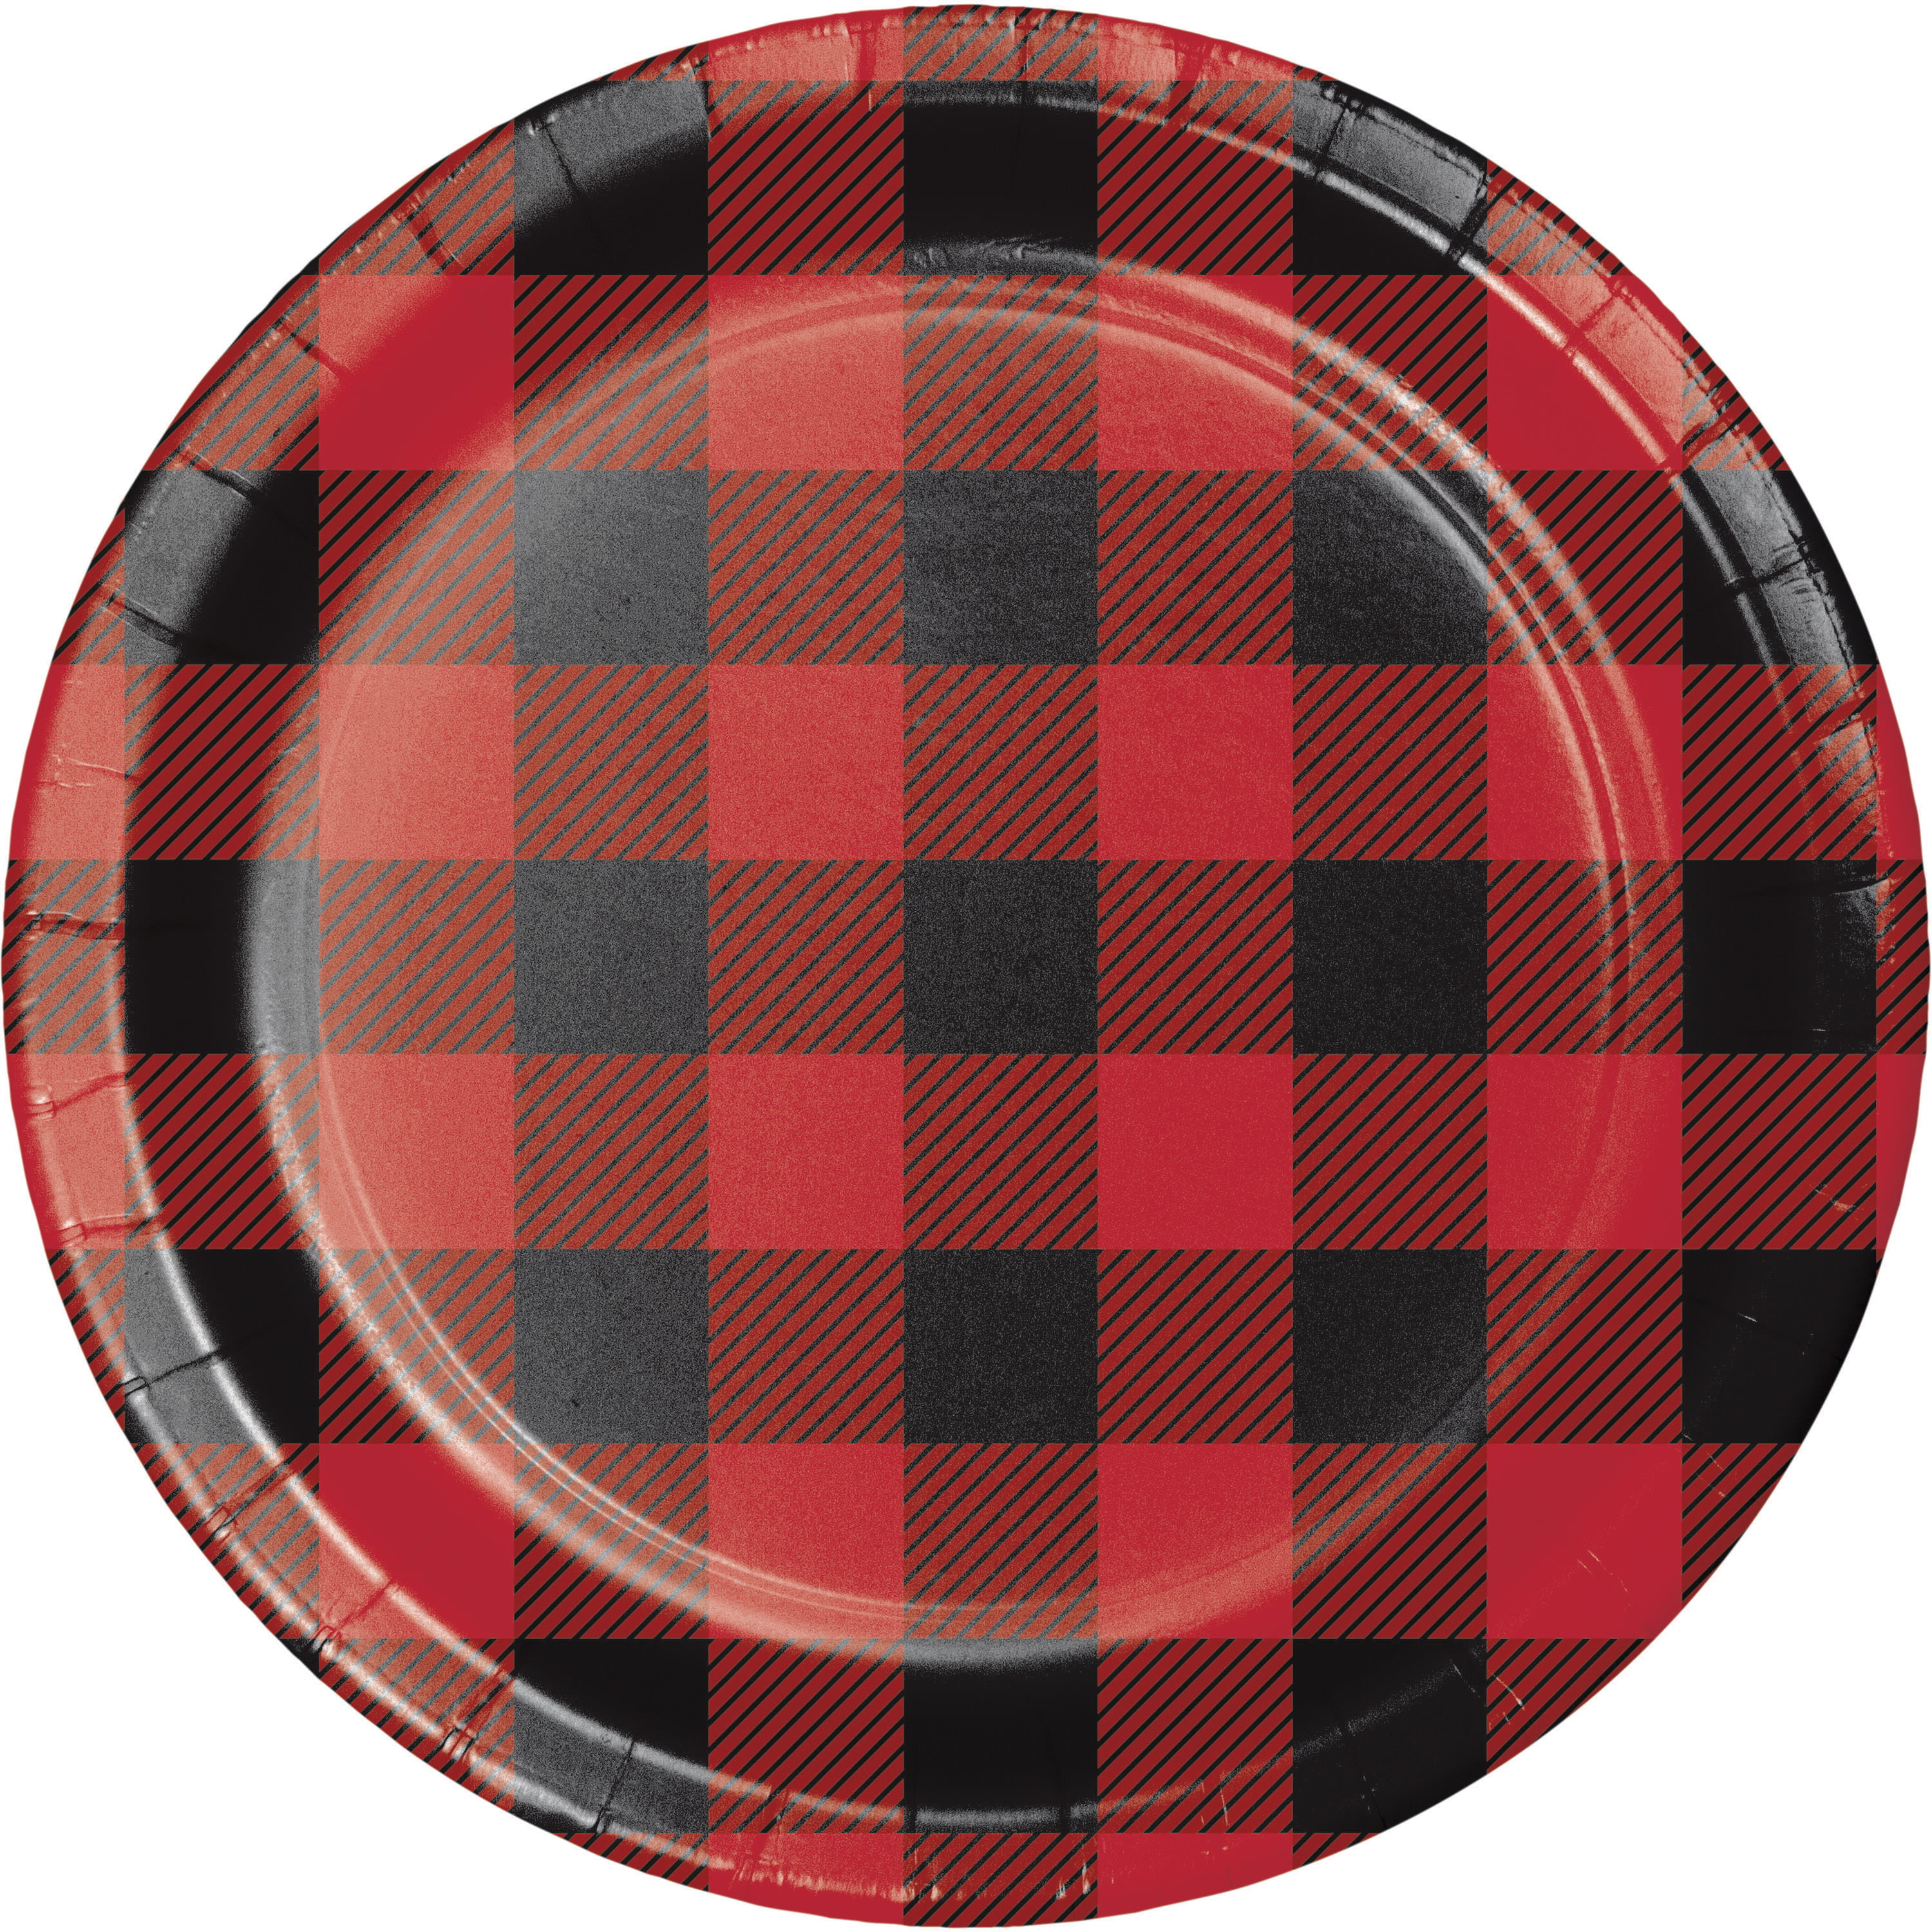 Black and White Check Creative Converting 24 Count Round Dessert Plates